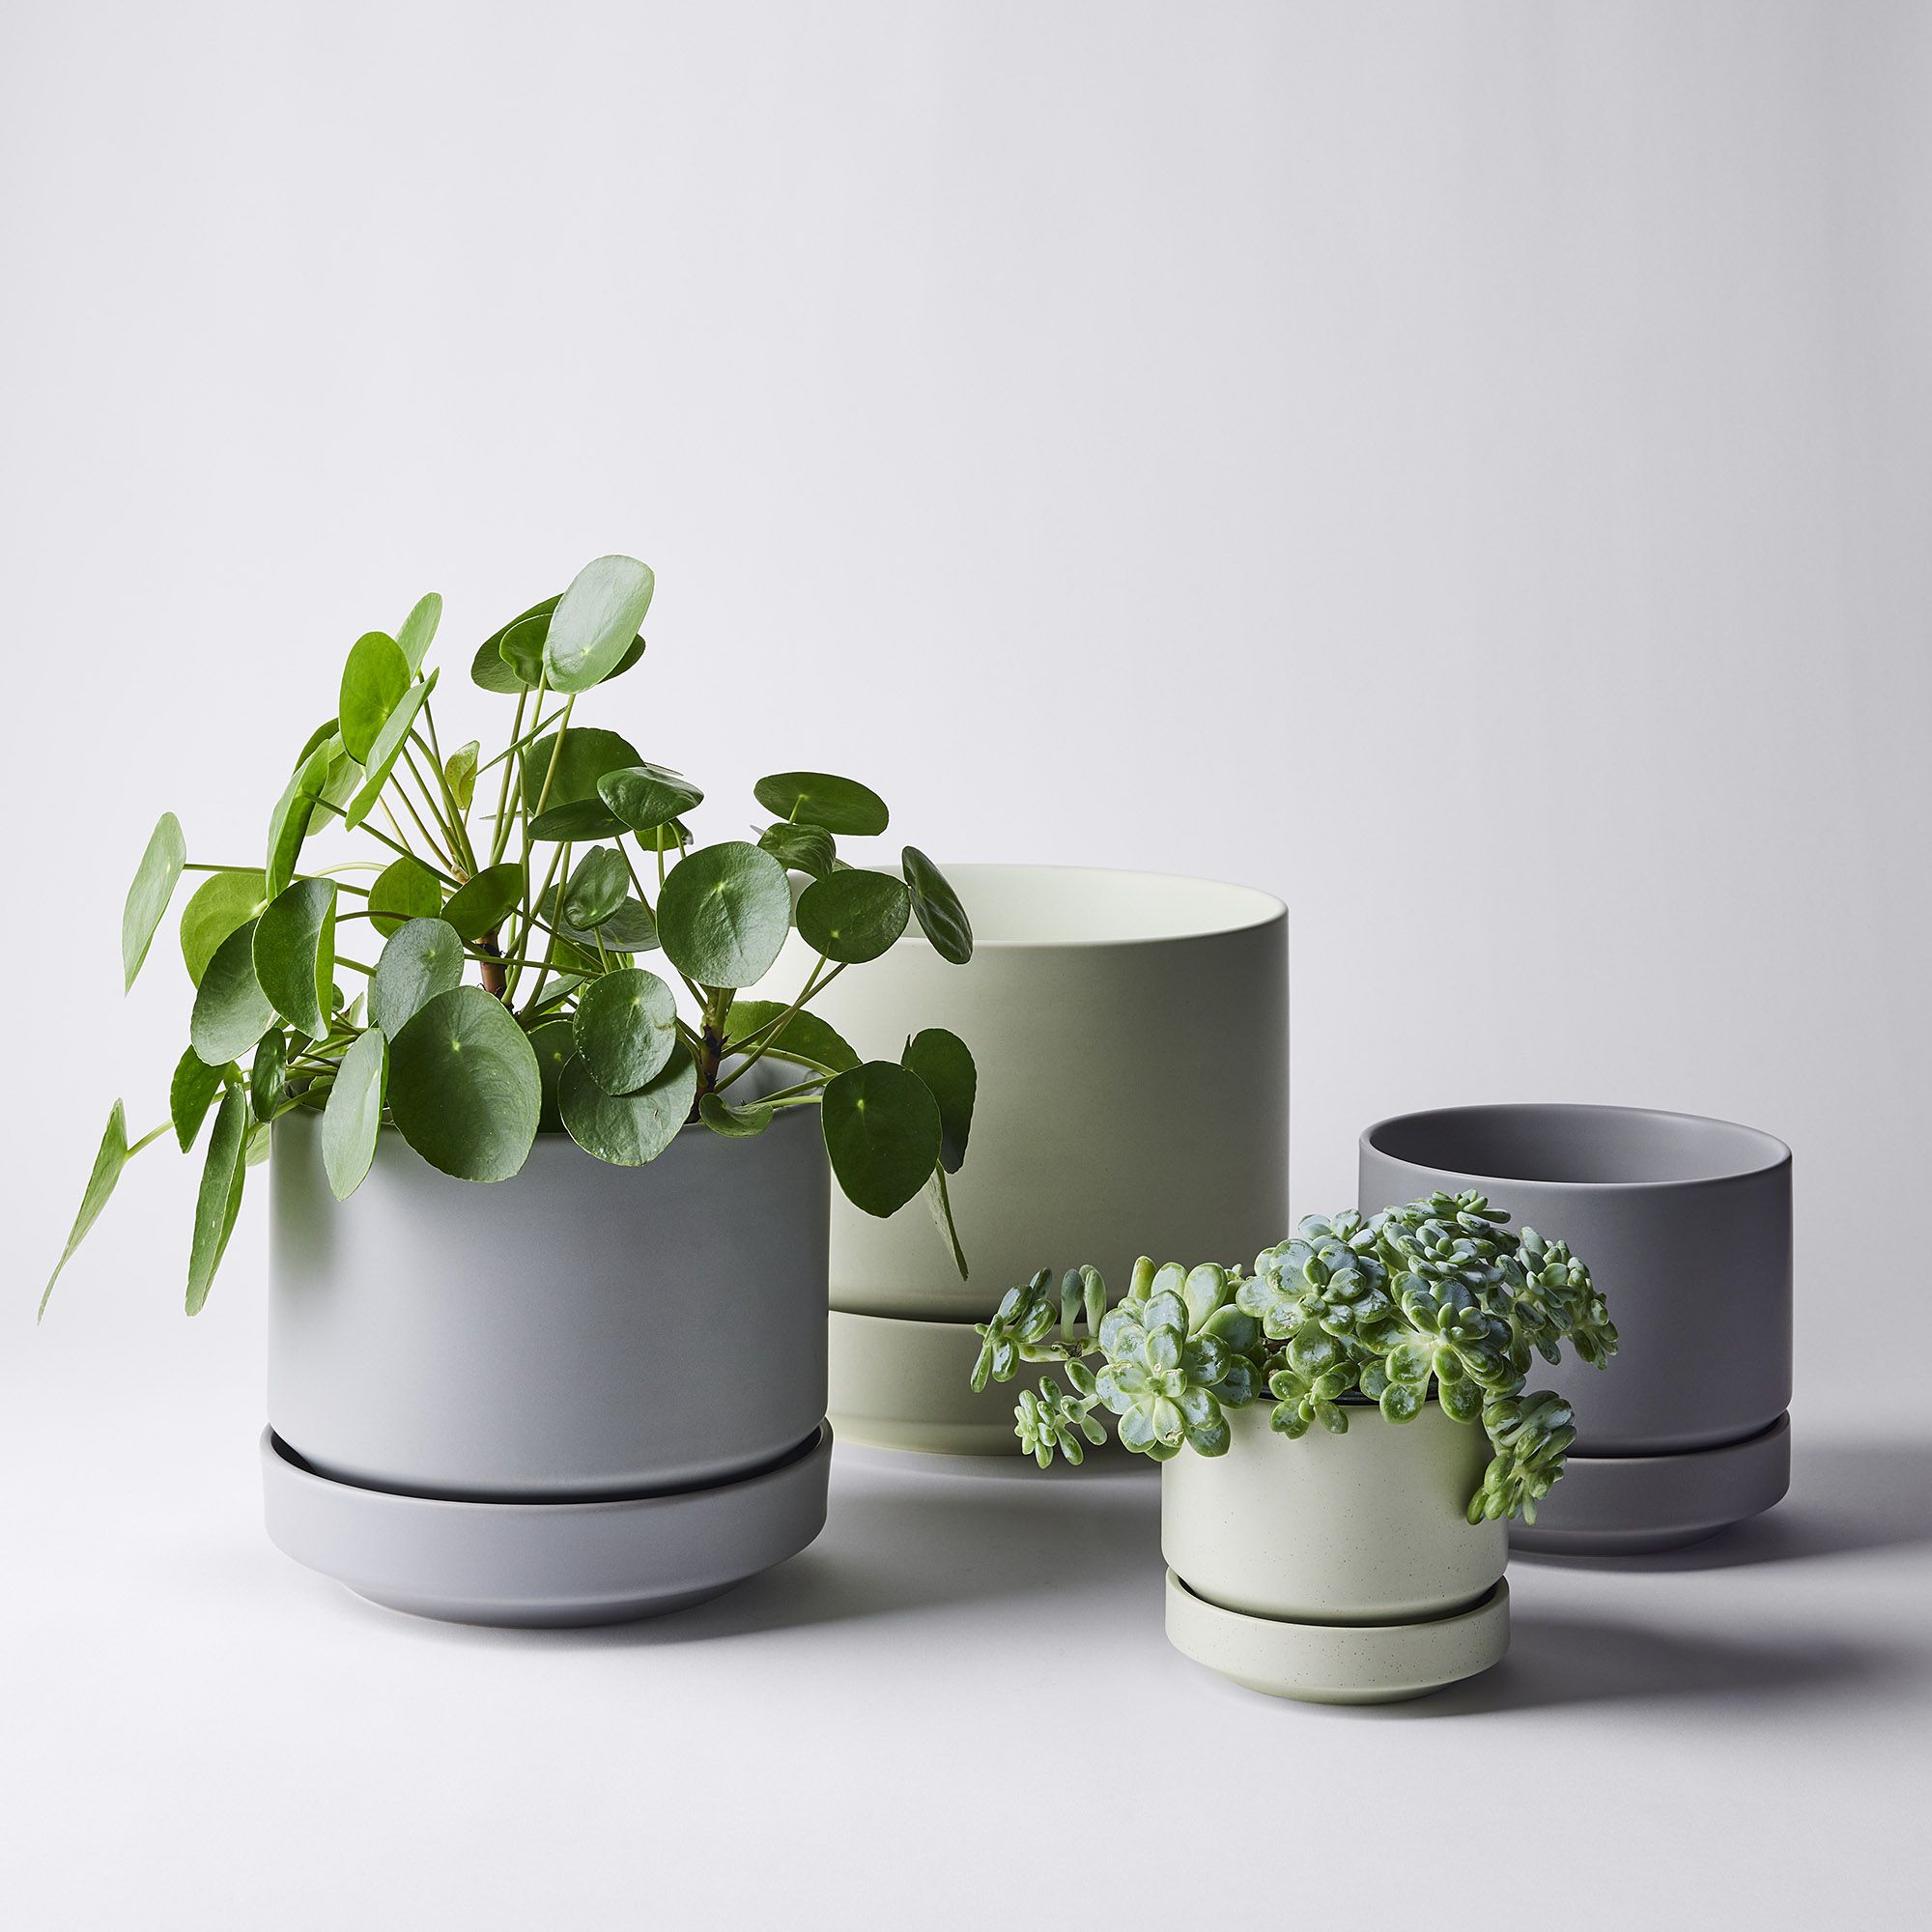 High-Fired Stoneware Planters Food52 on